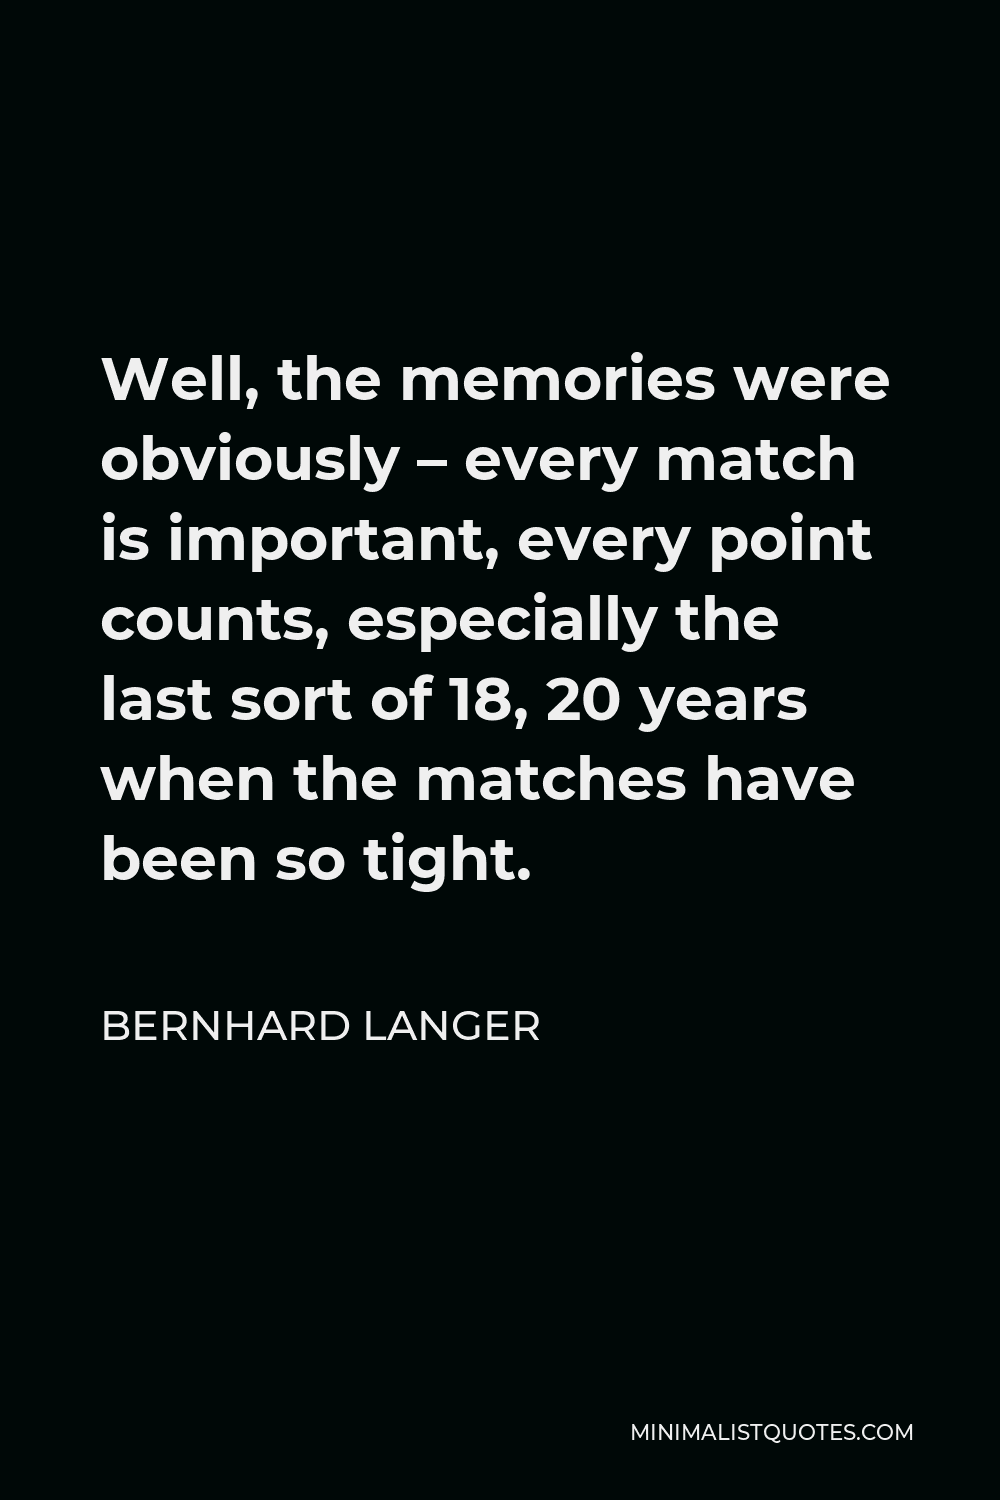 Bernhard Langer Quote - Well, the memories were obviously – every match is important, every point counts, especially the last sort of 18, 20 years when the matches have been so tight.